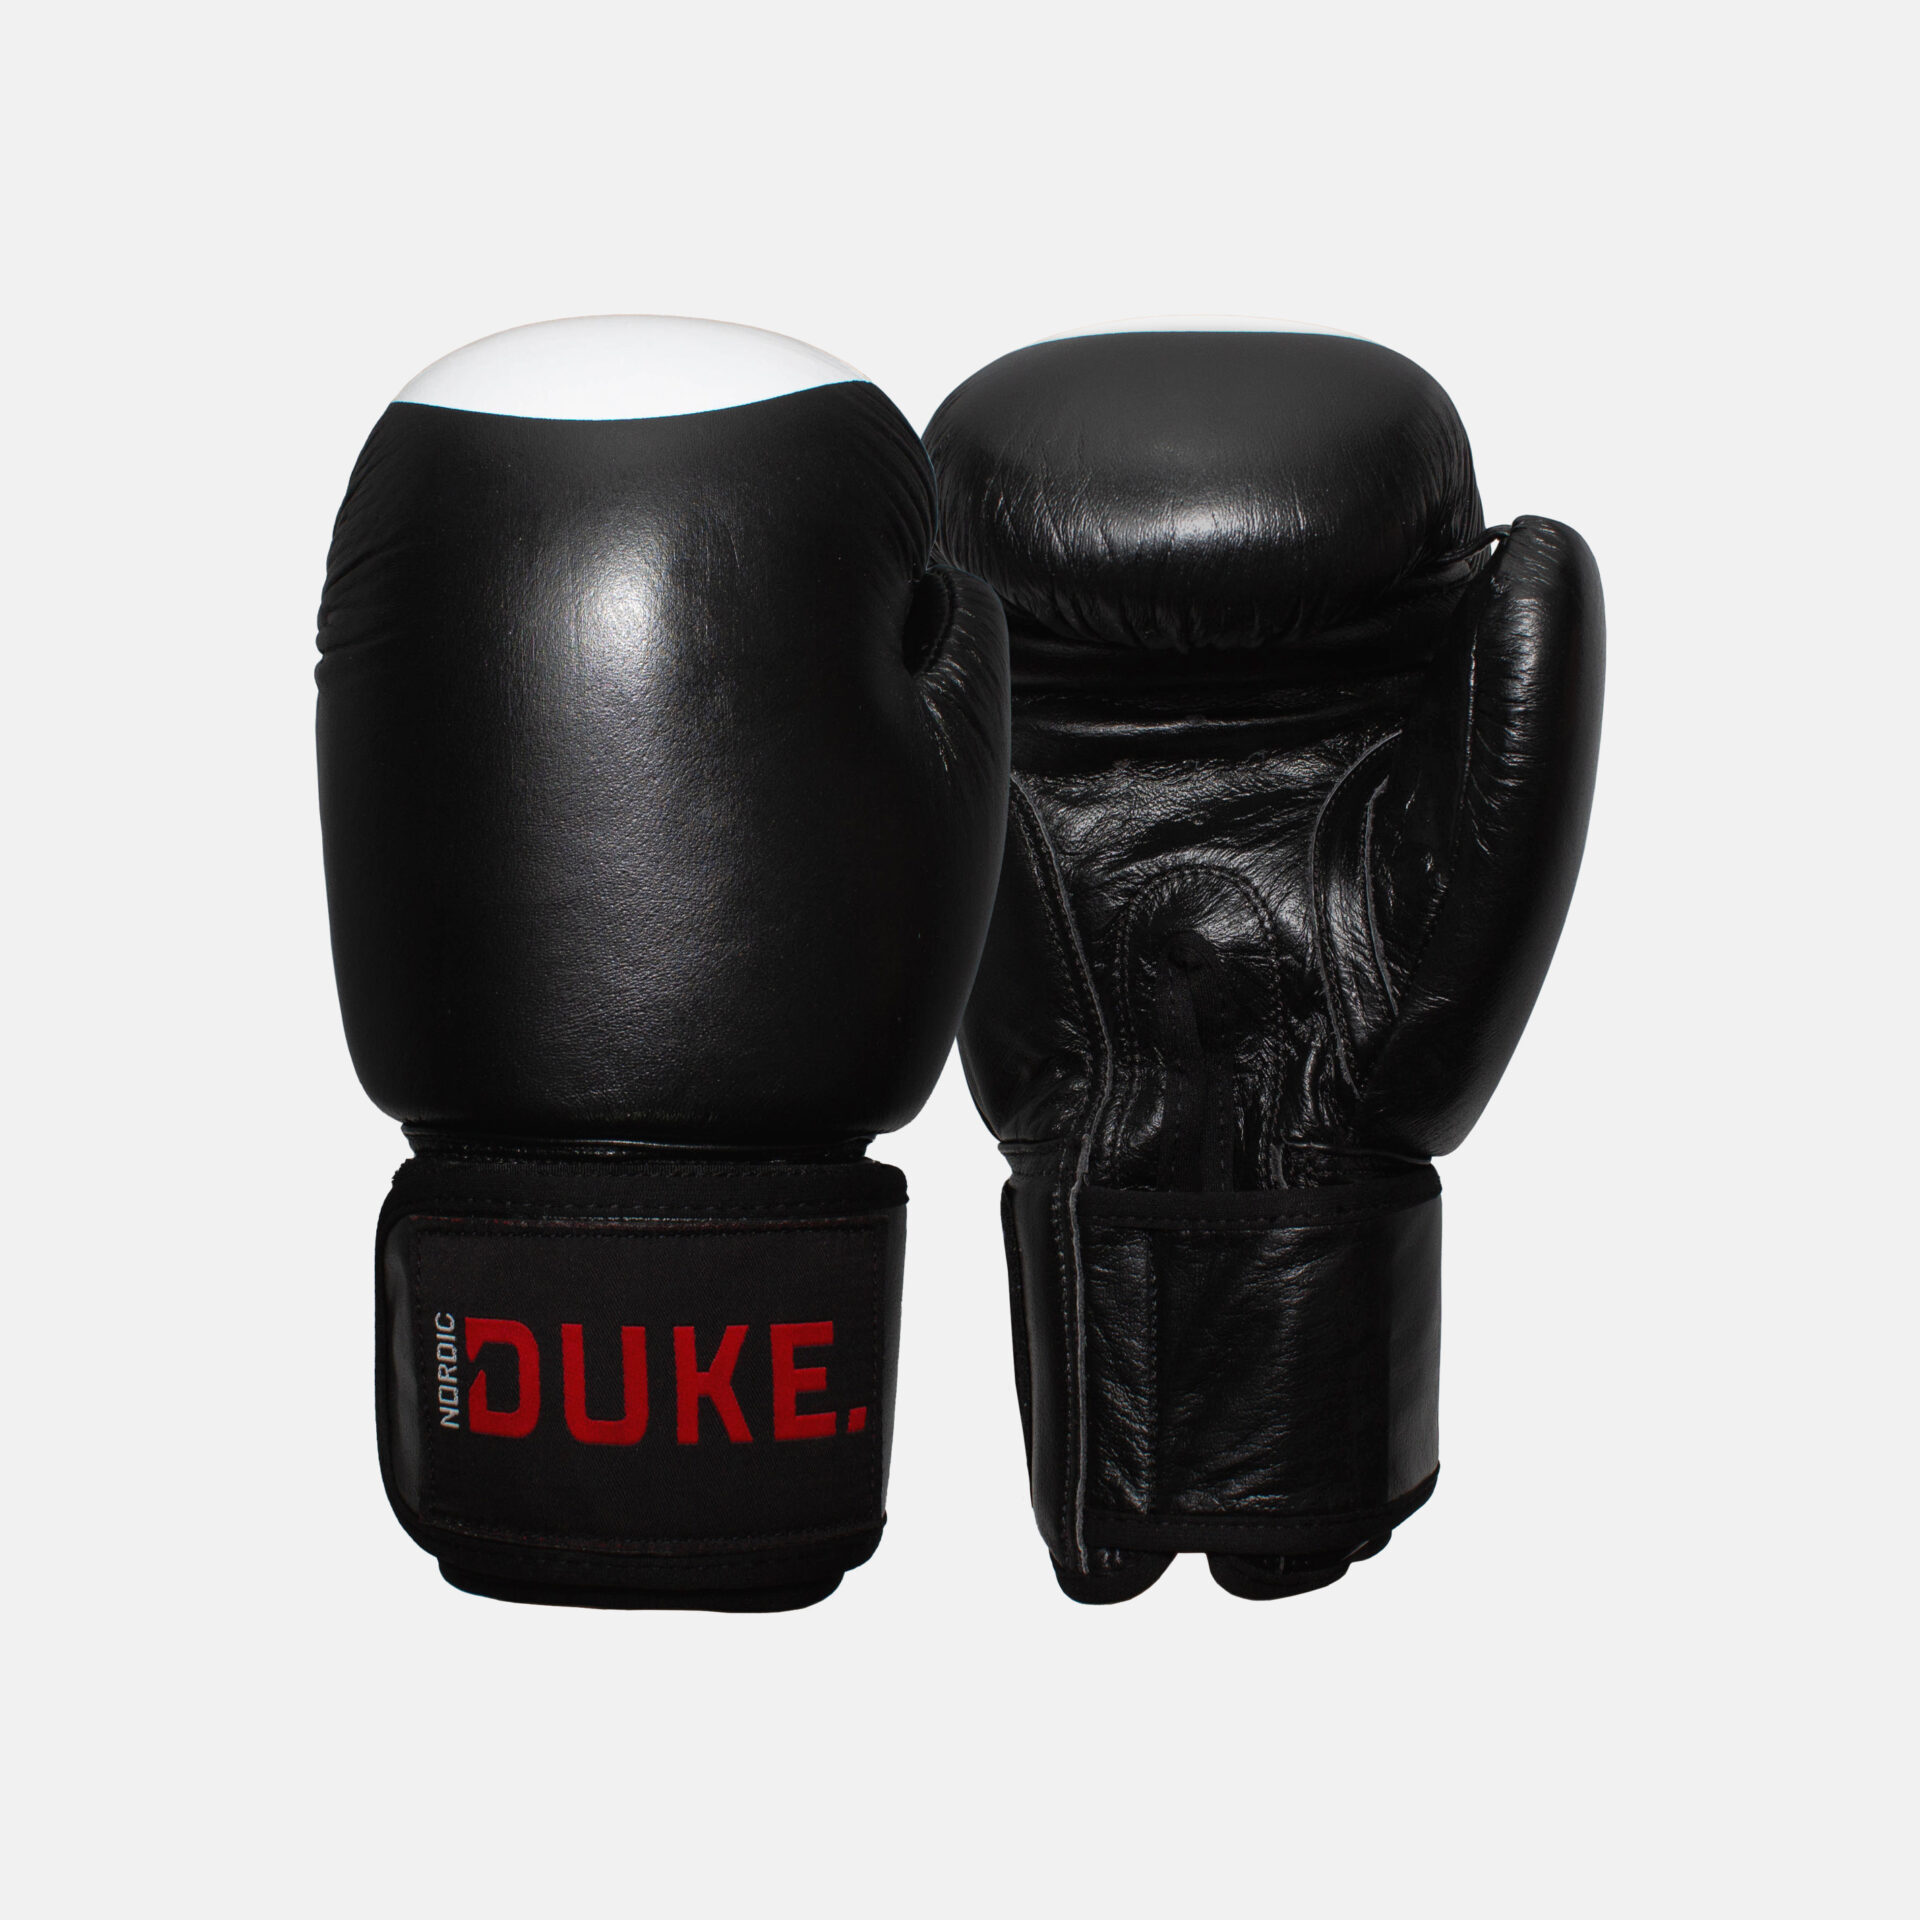 Nordic Duke Boxing Gloves Pro for serious boxing - made of real leather!